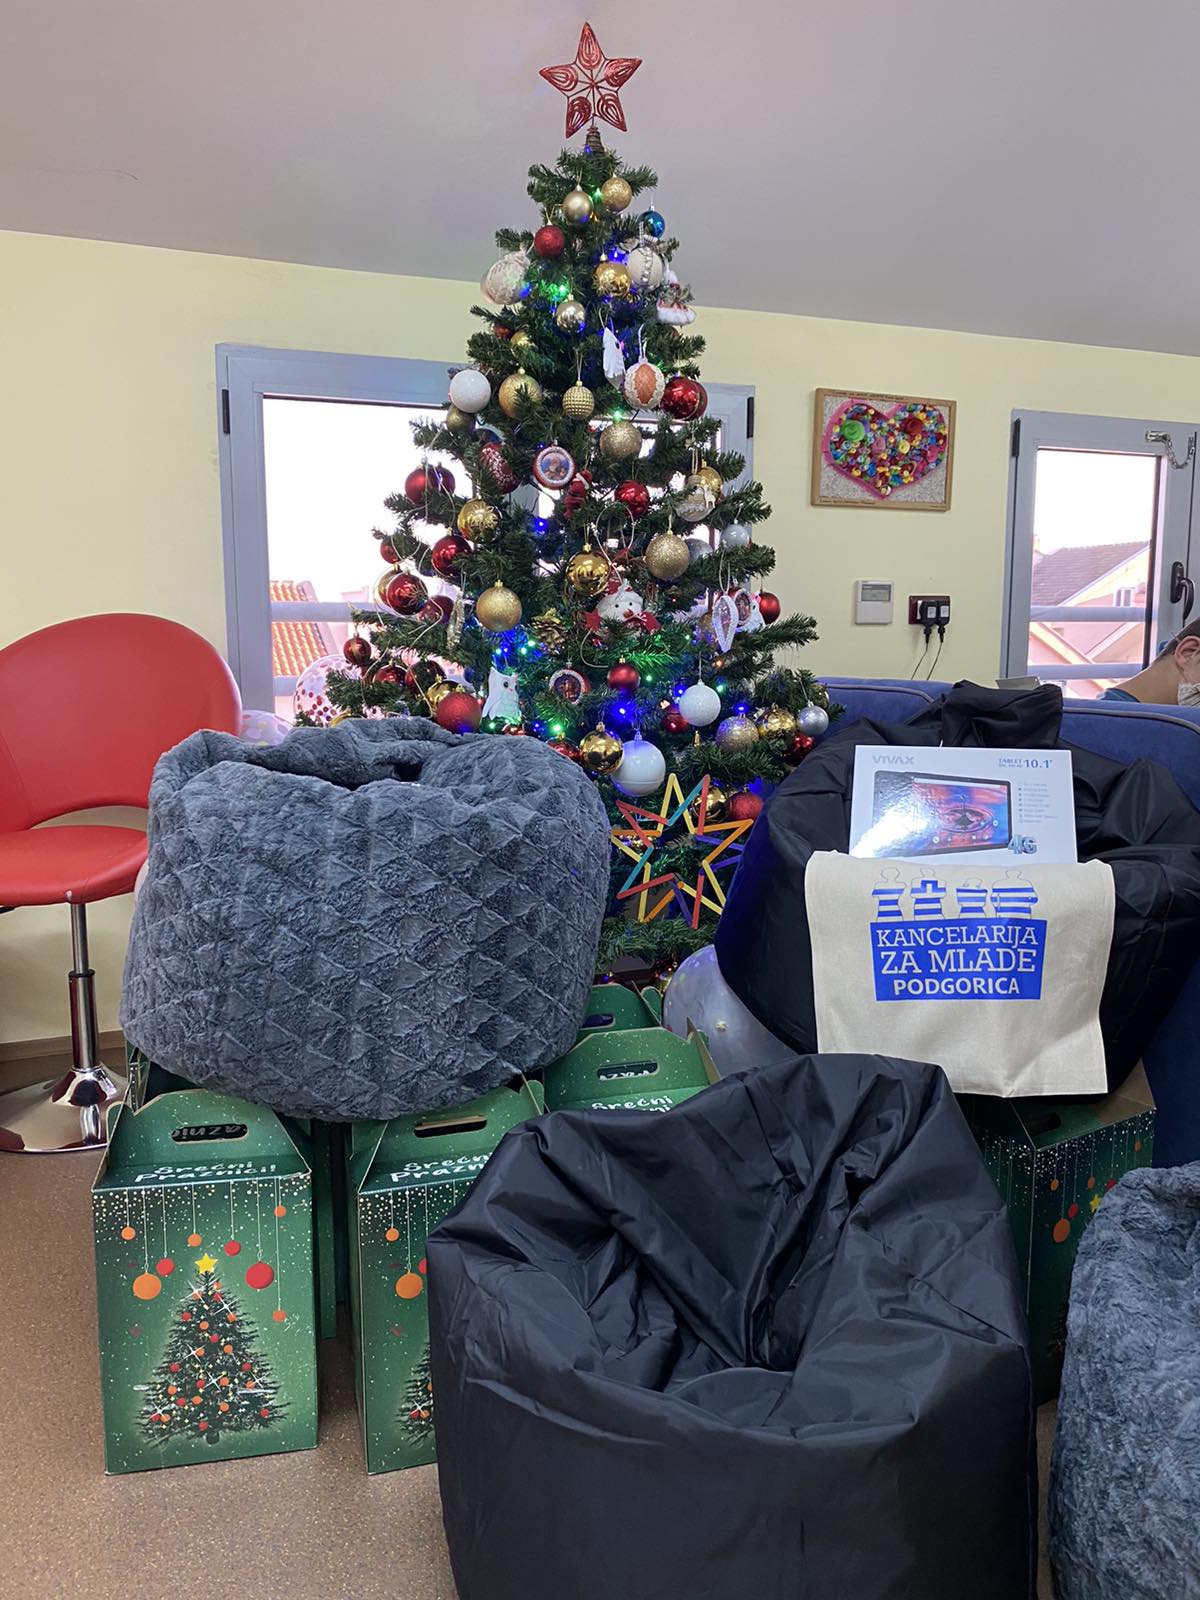 The Office for Youth  of the Capital presented New Year's gifts for the Day Center at Stari Aerodrom and to the first graders of the elementary school "Marko Miljanov"